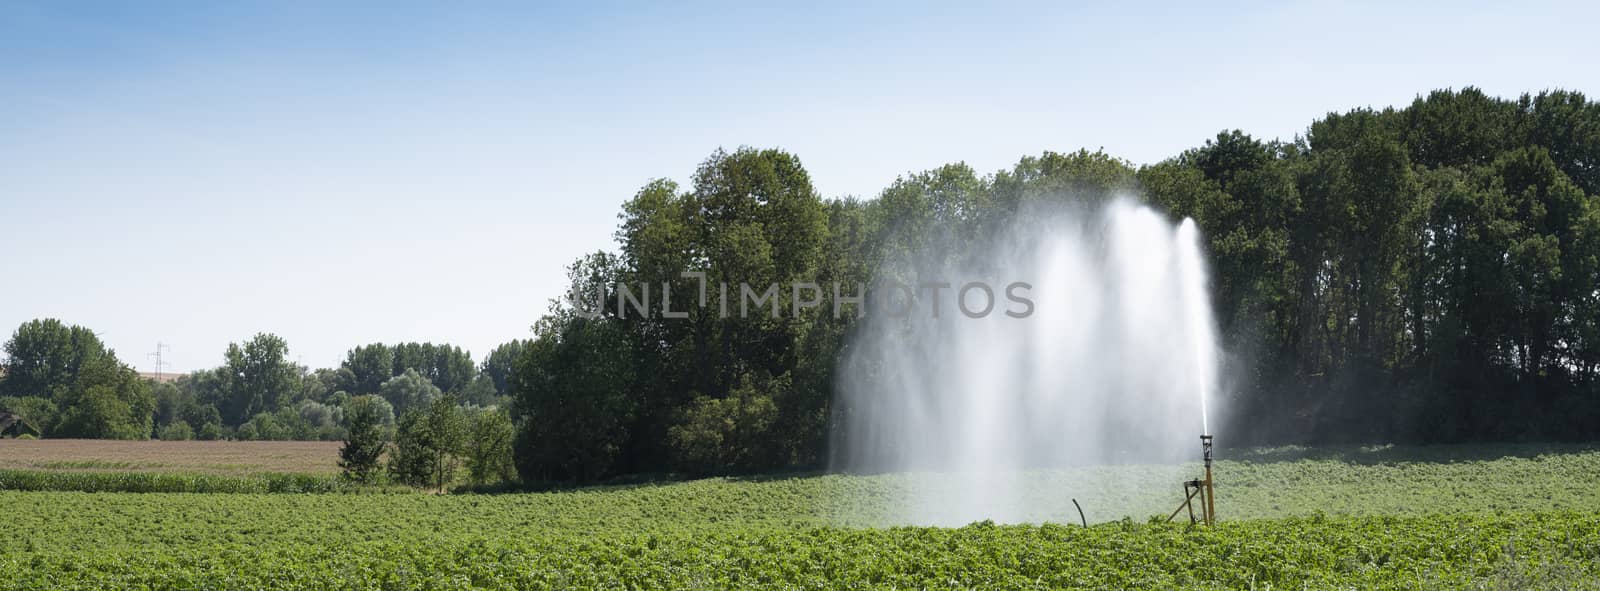 irrigation of crop on field in the north of france in summer under blue sky